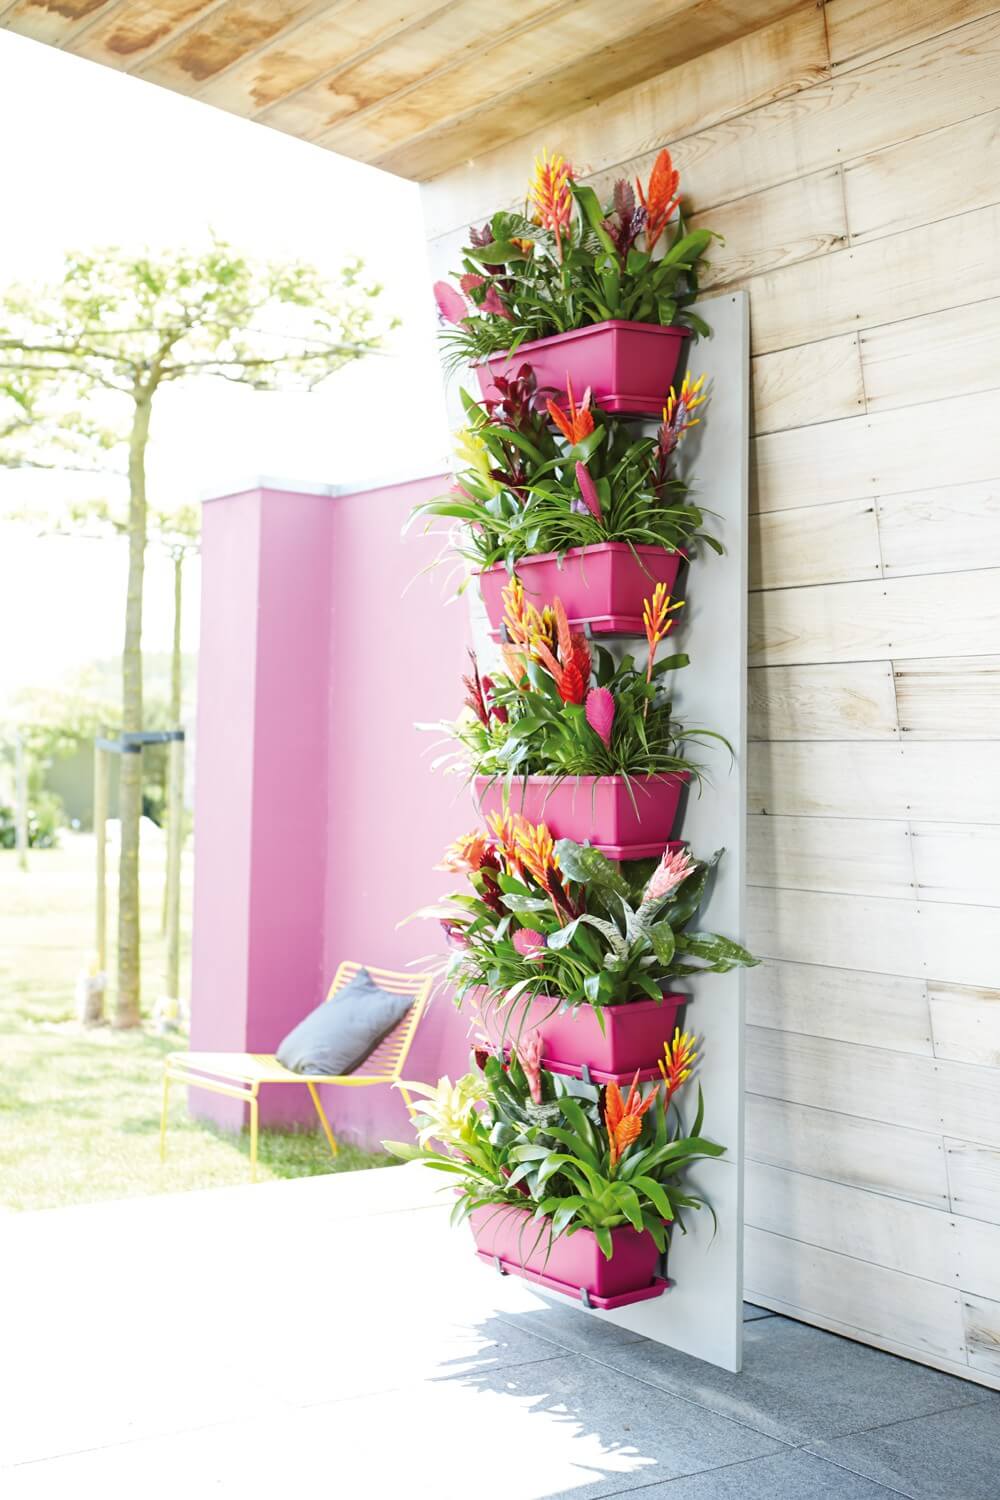 Bright Pink Adds a Pop of Color and Accents Vibrant Bromeliads